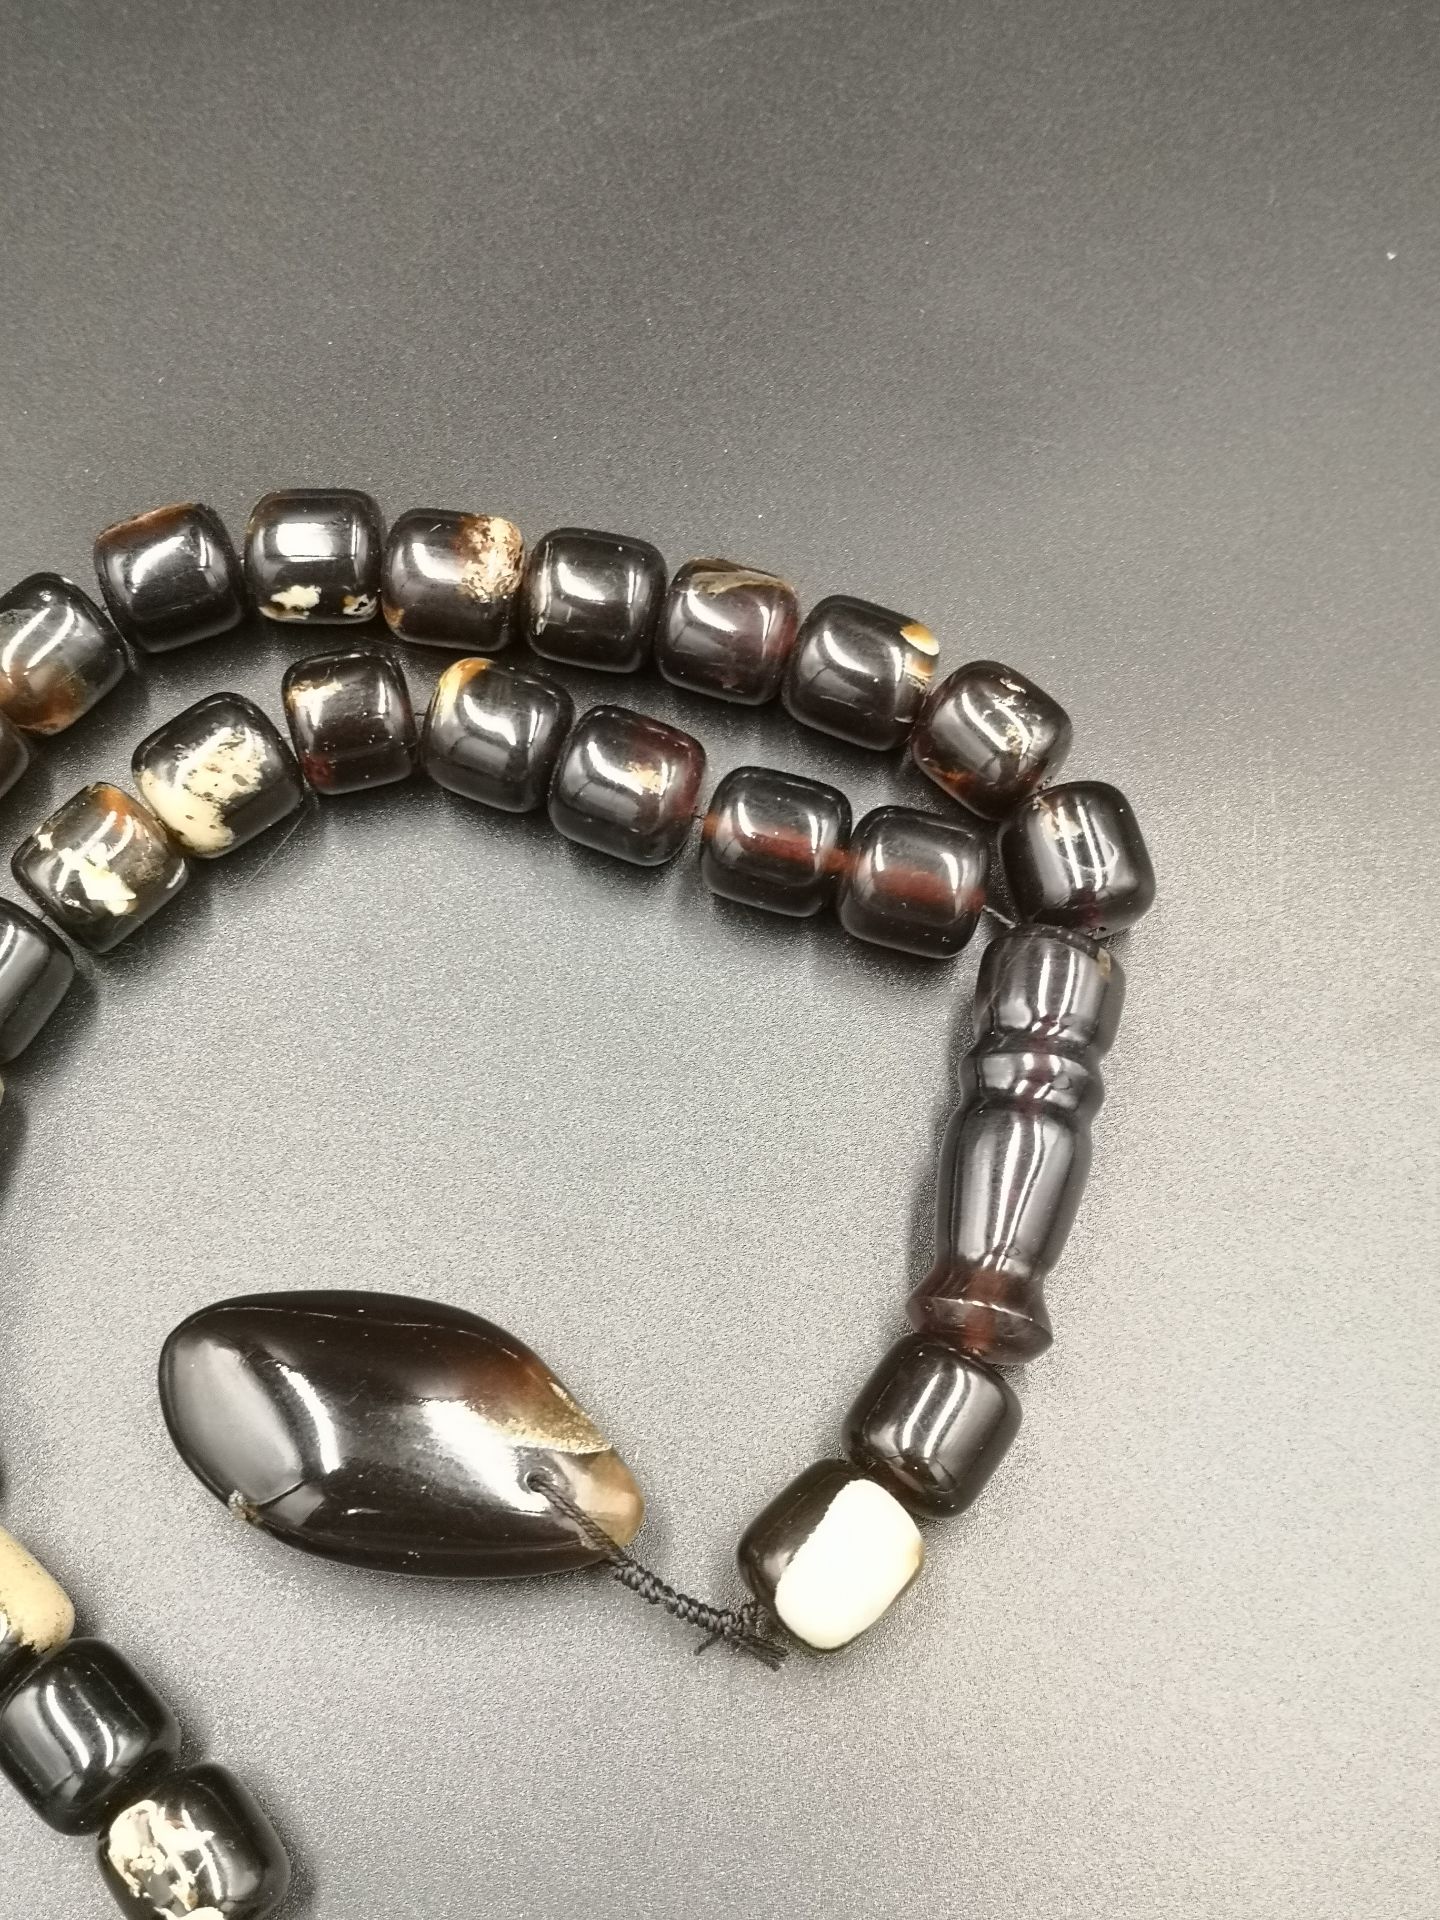 Indonesian blue amber worry beads - Image 4 of 5